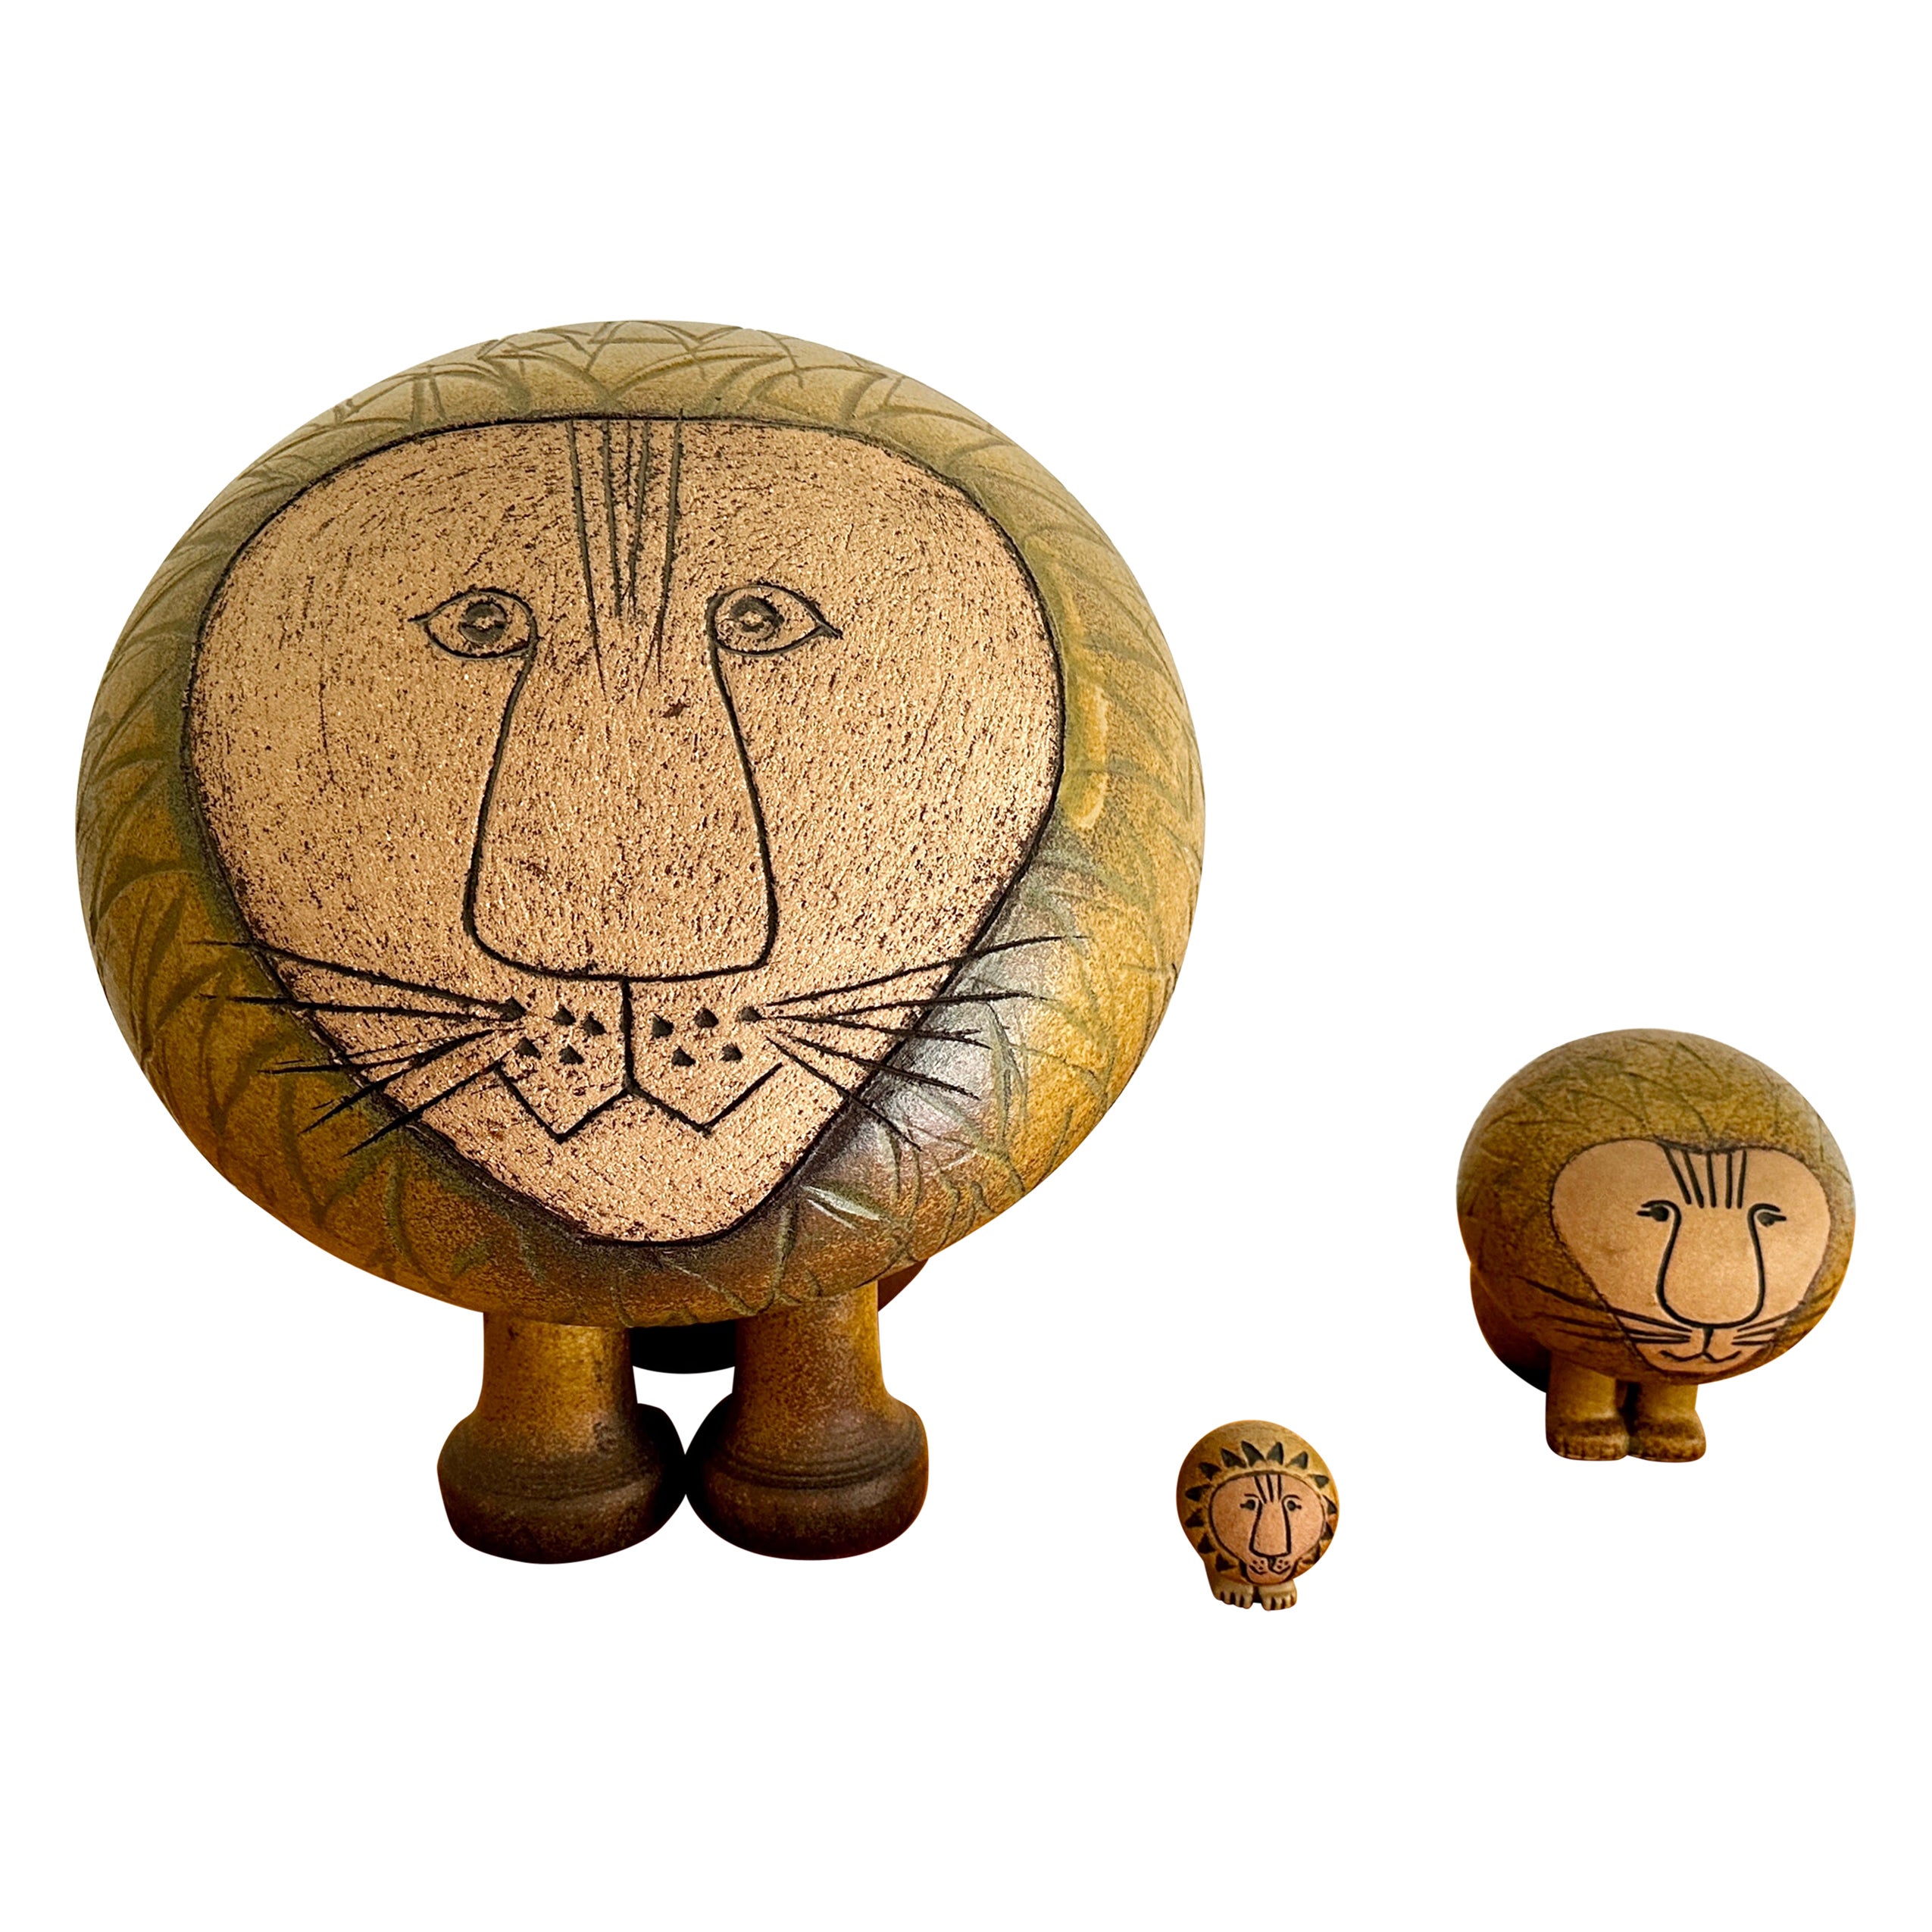 Three Lions From The Afrika Series Designed By Lisa Larson For Gustavsberg